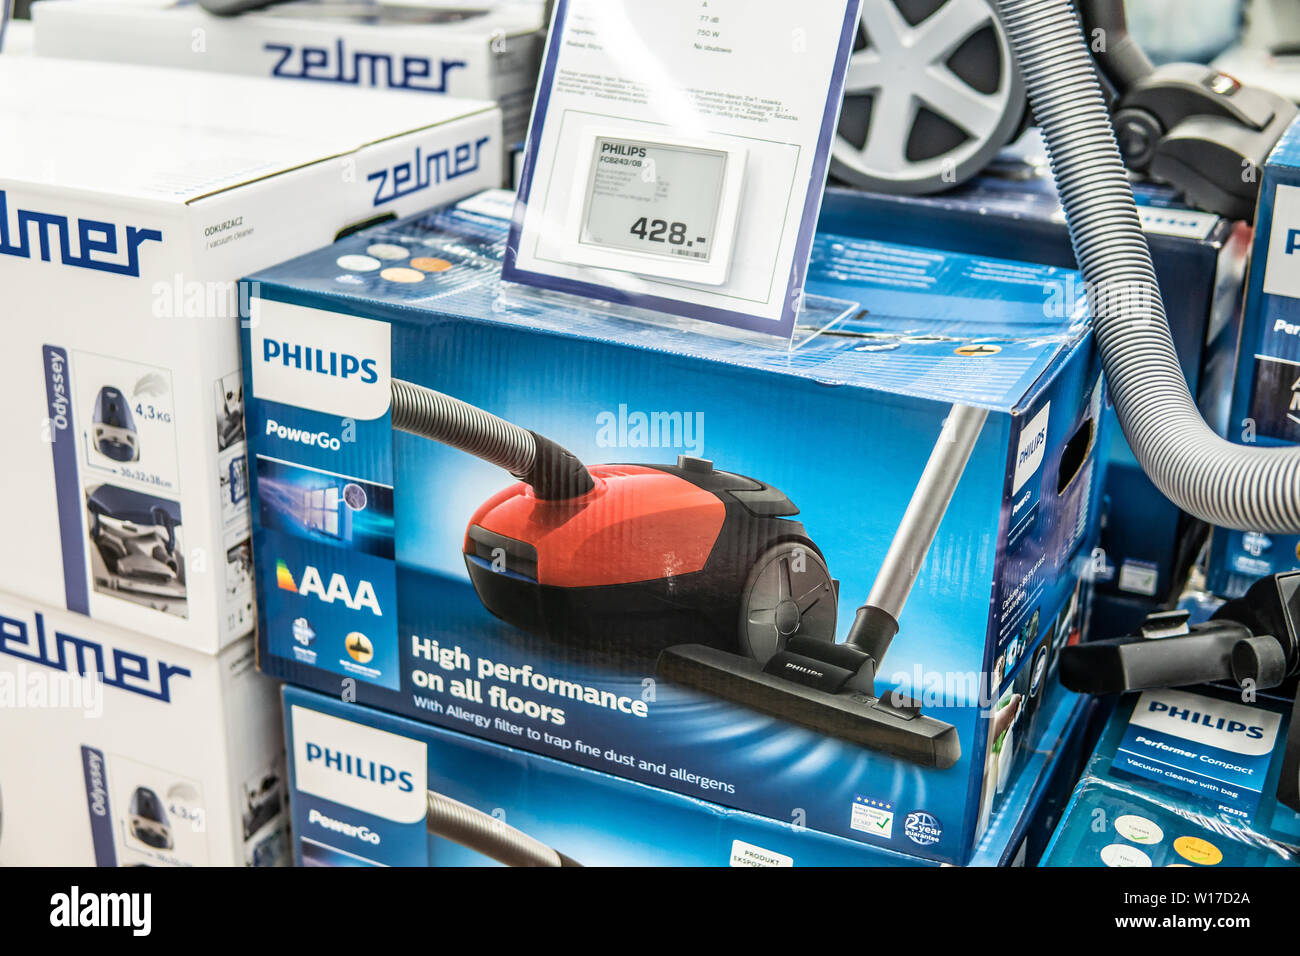 Lodz, Poland, July 2018 inside Saturn electronic store, Philips Performer  Expert Premium vacuum cleaner, high performance on all floors, antiallergic  Stock Photo - Alamy